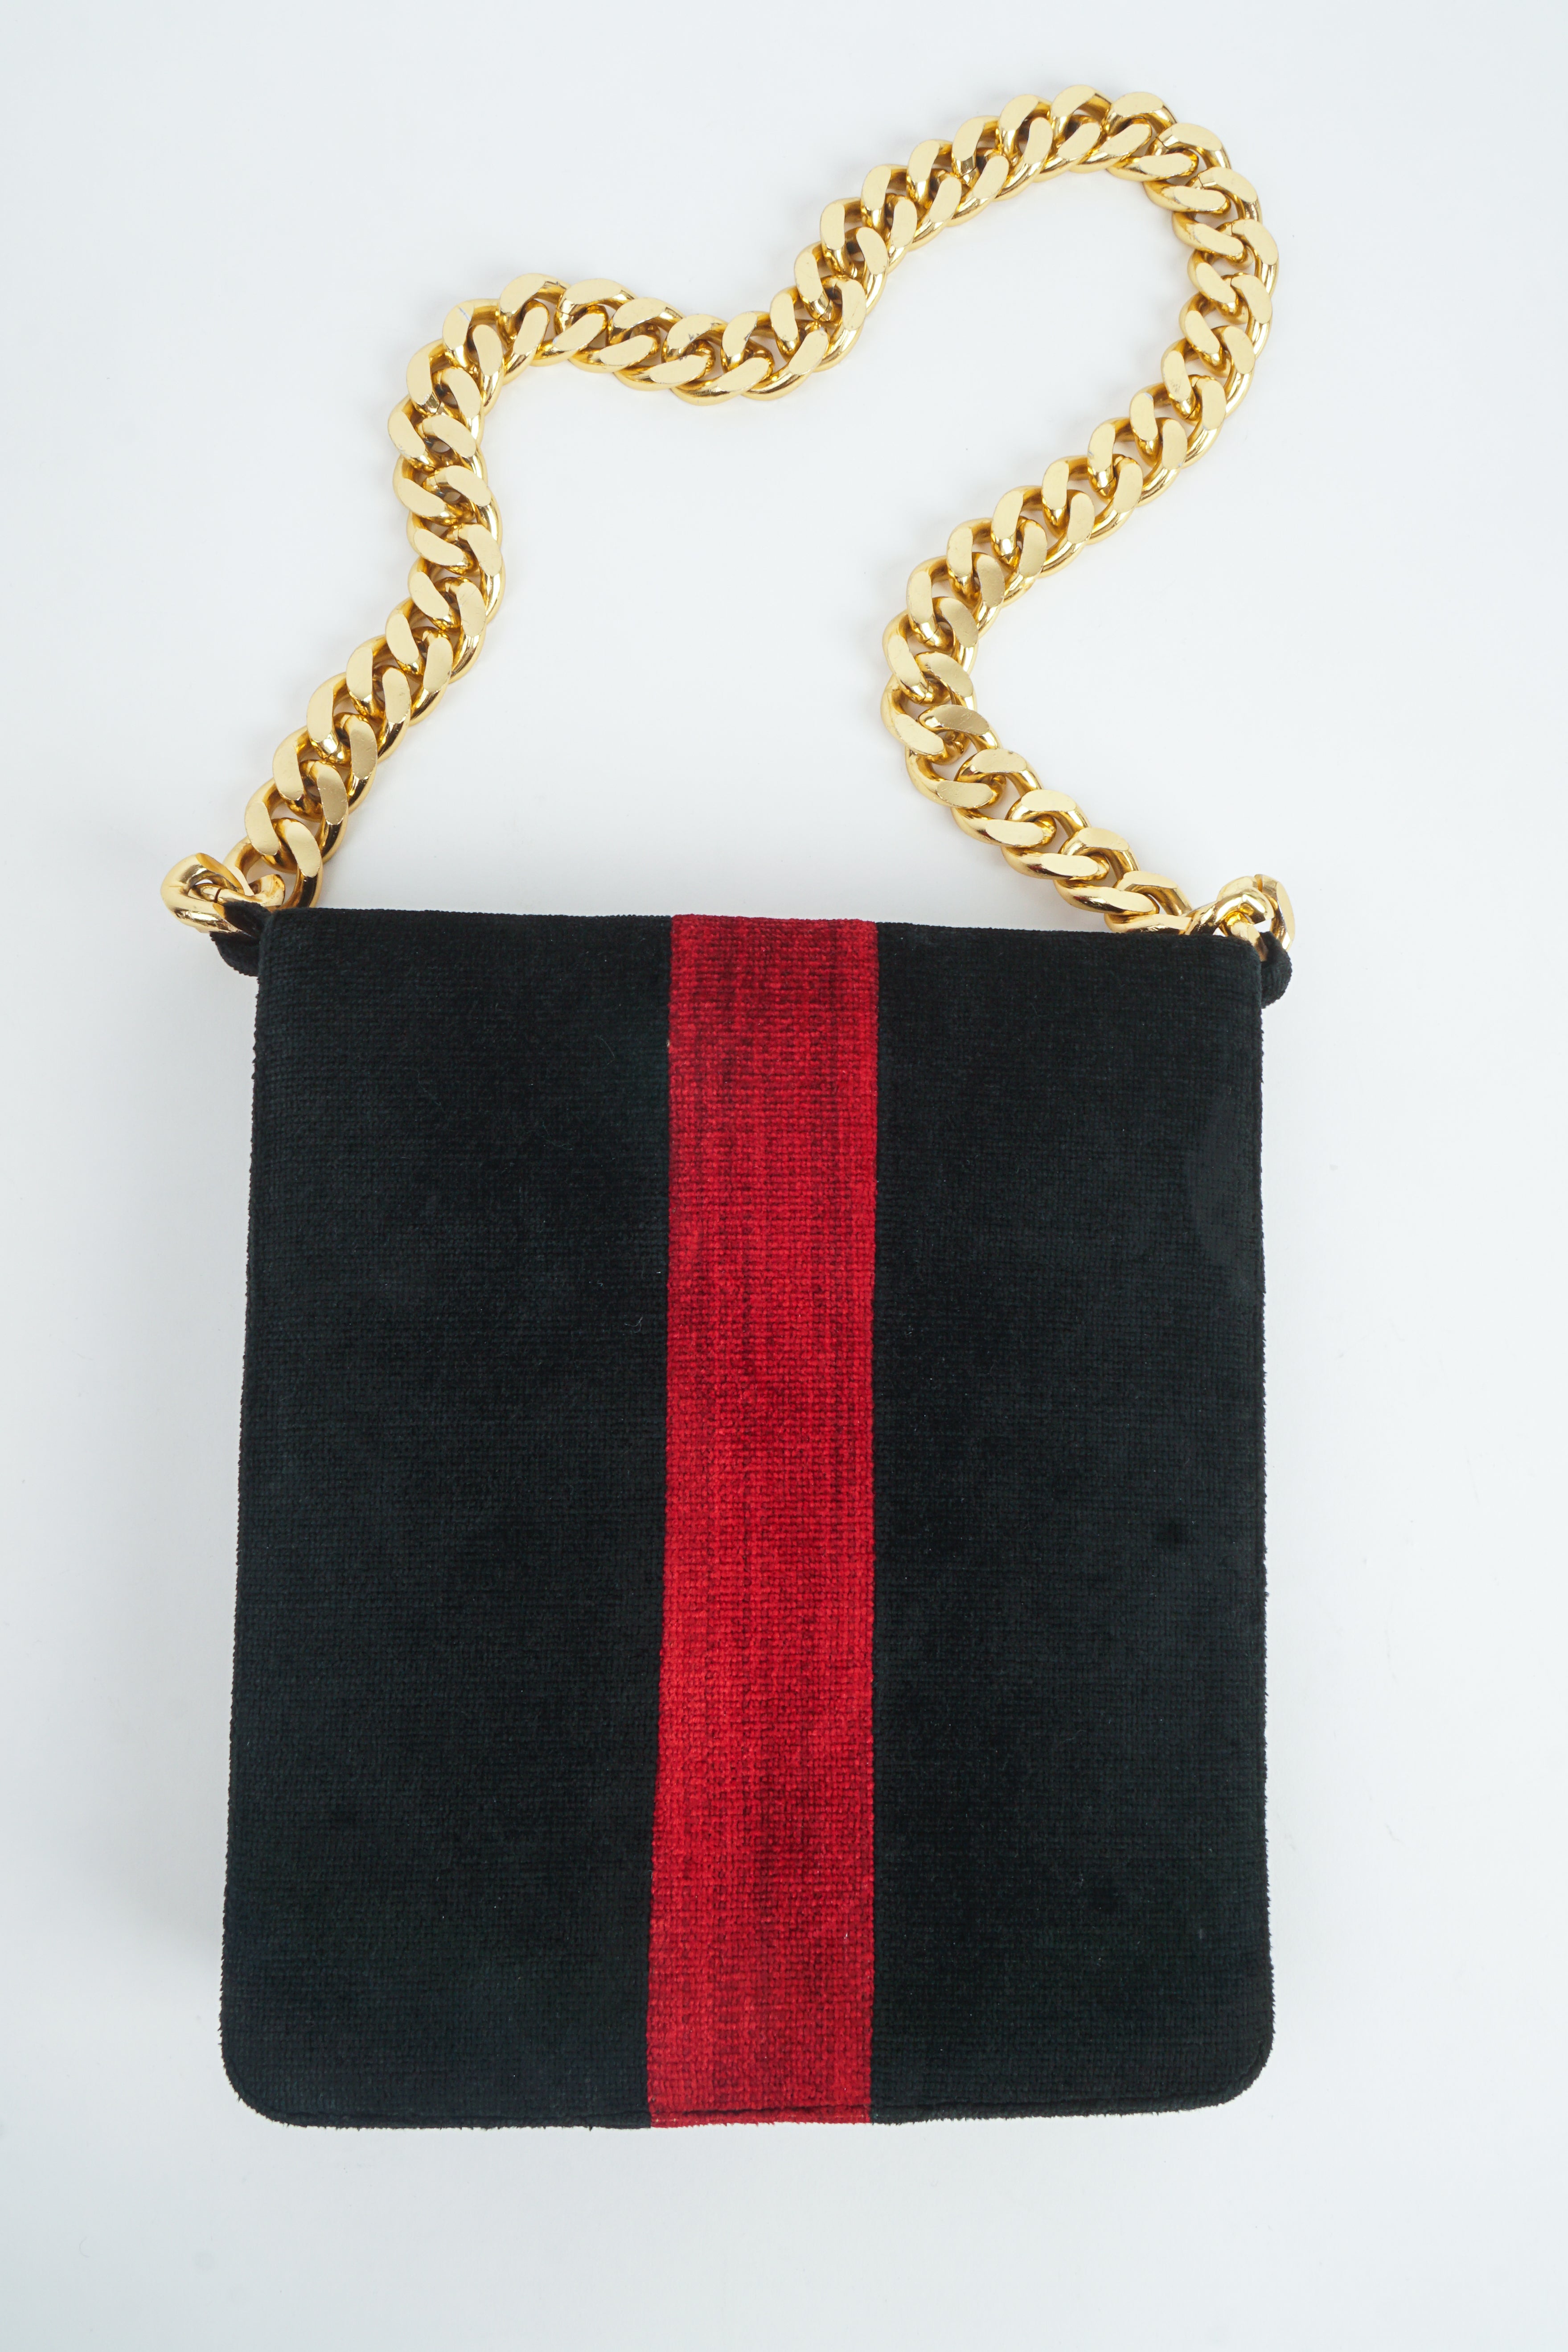 VIntage Lewis Chenille Stripe Chain Bag front at Recess Los Angeles